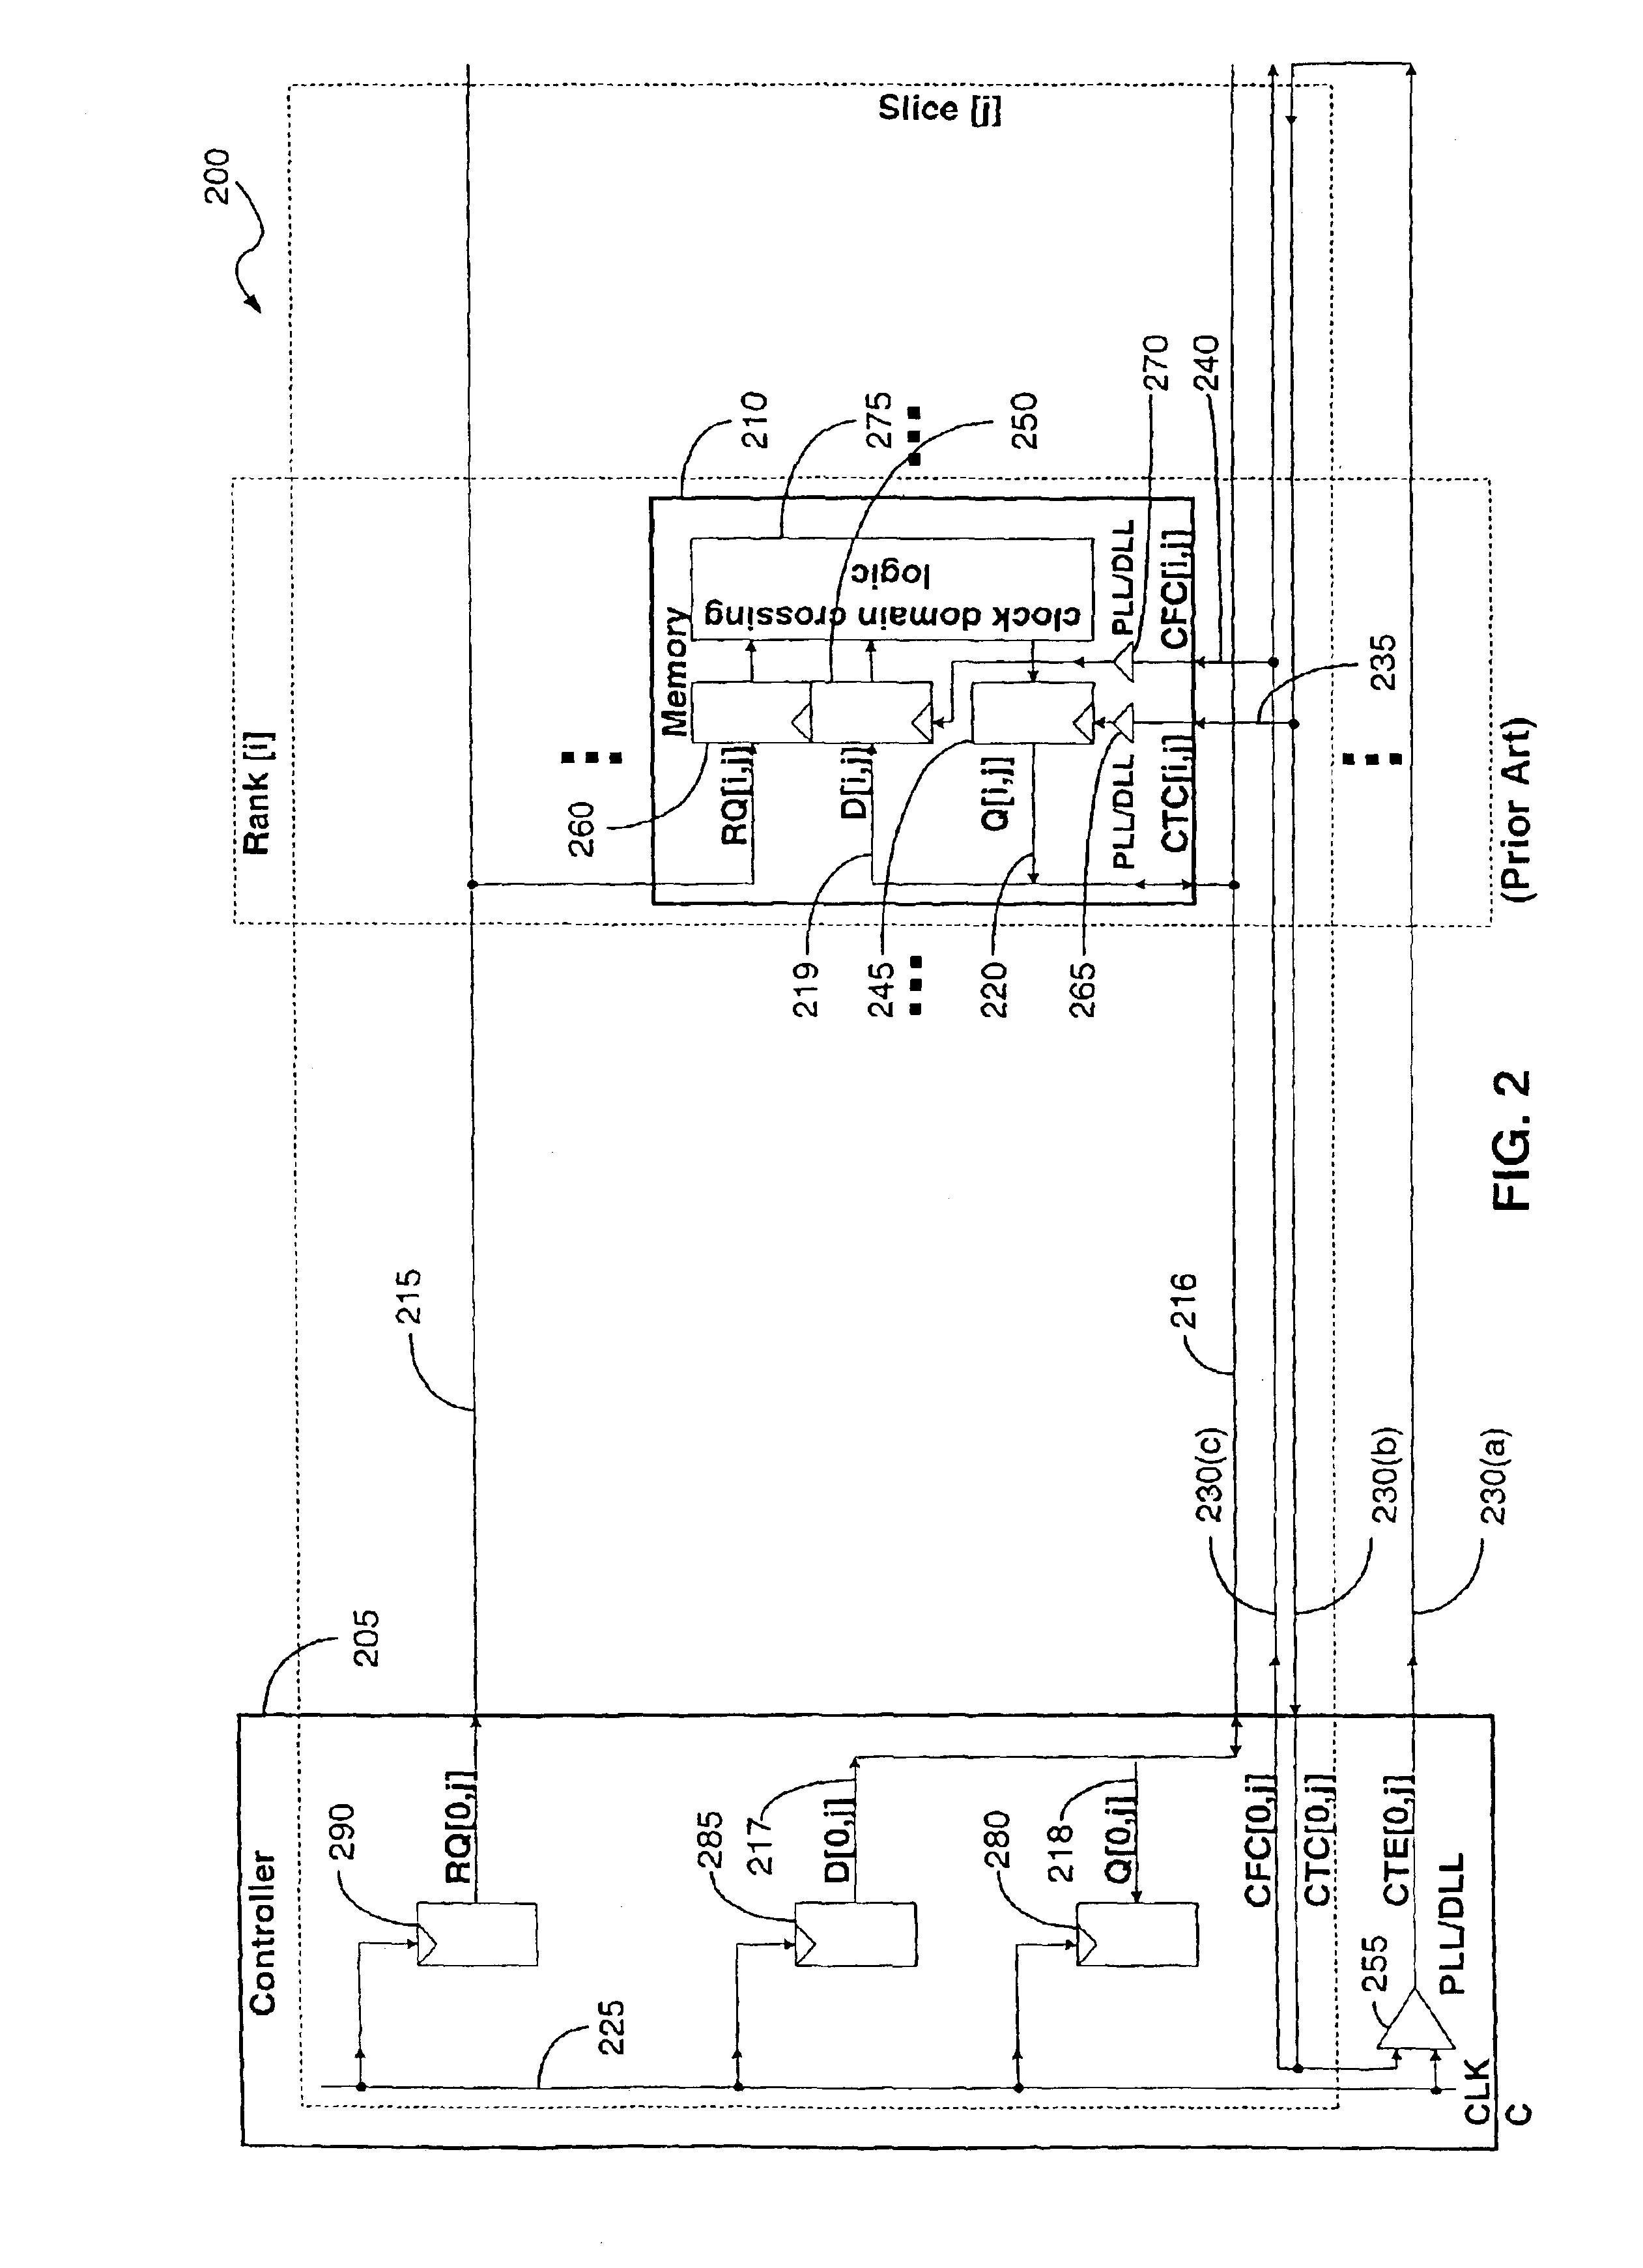 Timing calibration apparatus and method for a memory device signaling system